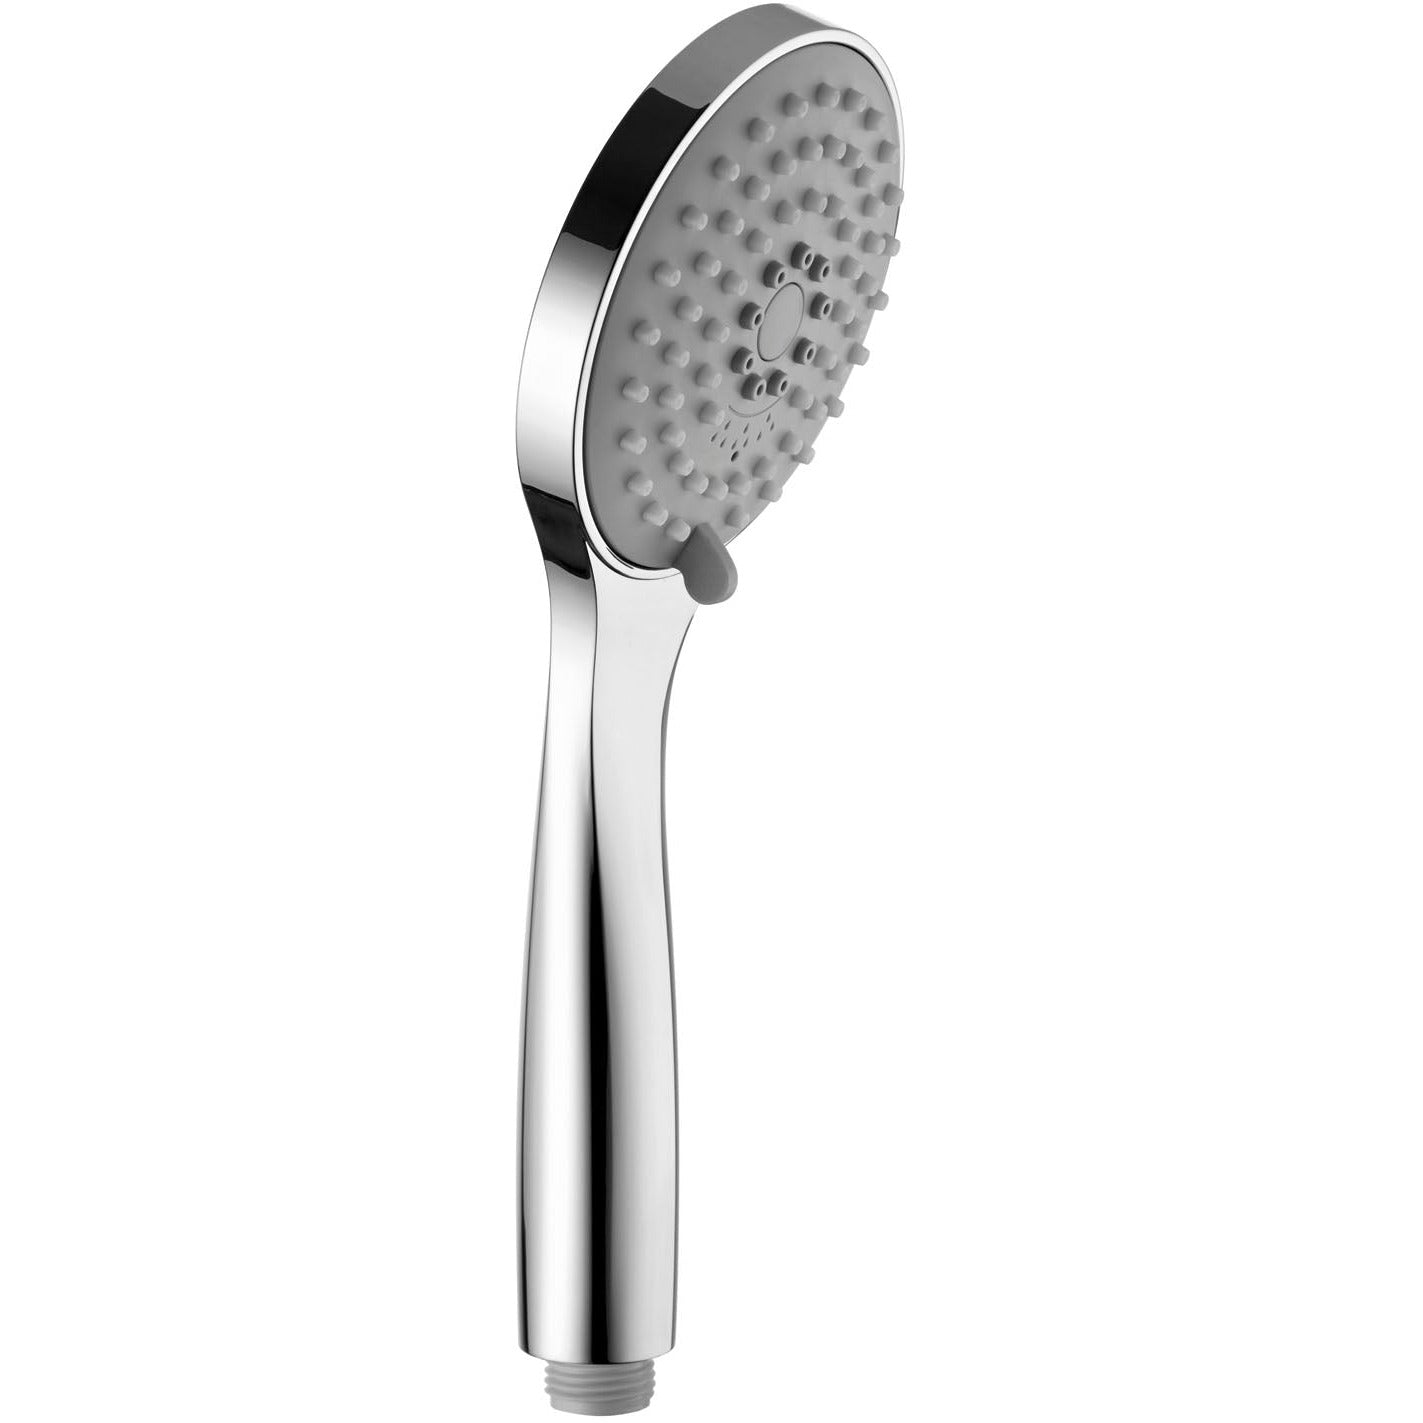 Hand shower round 3 functions 9911A6